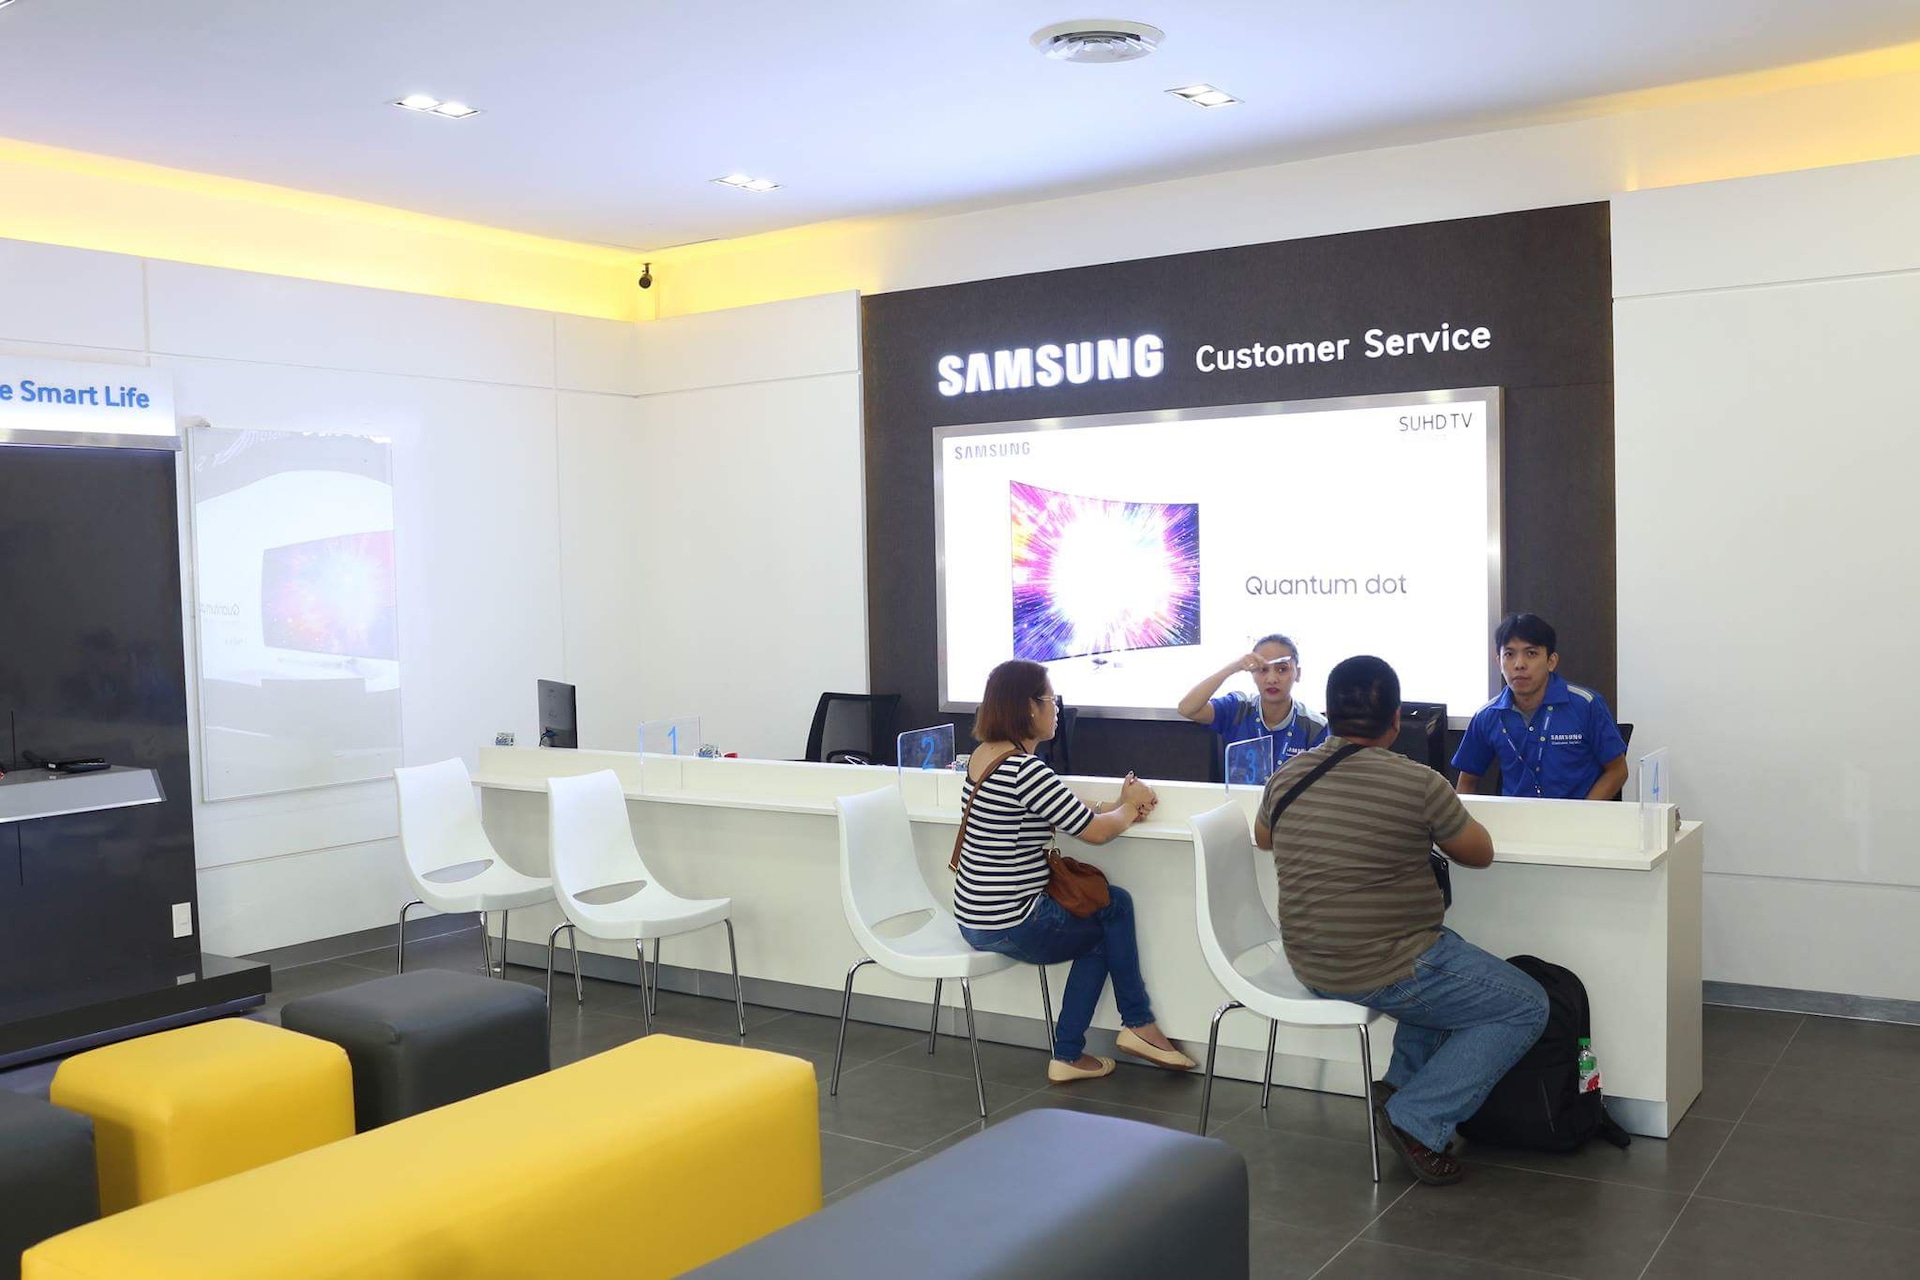 Samsung Newly Renovated Service Center: Chronicles Works and Services Inc. | Samsung ...